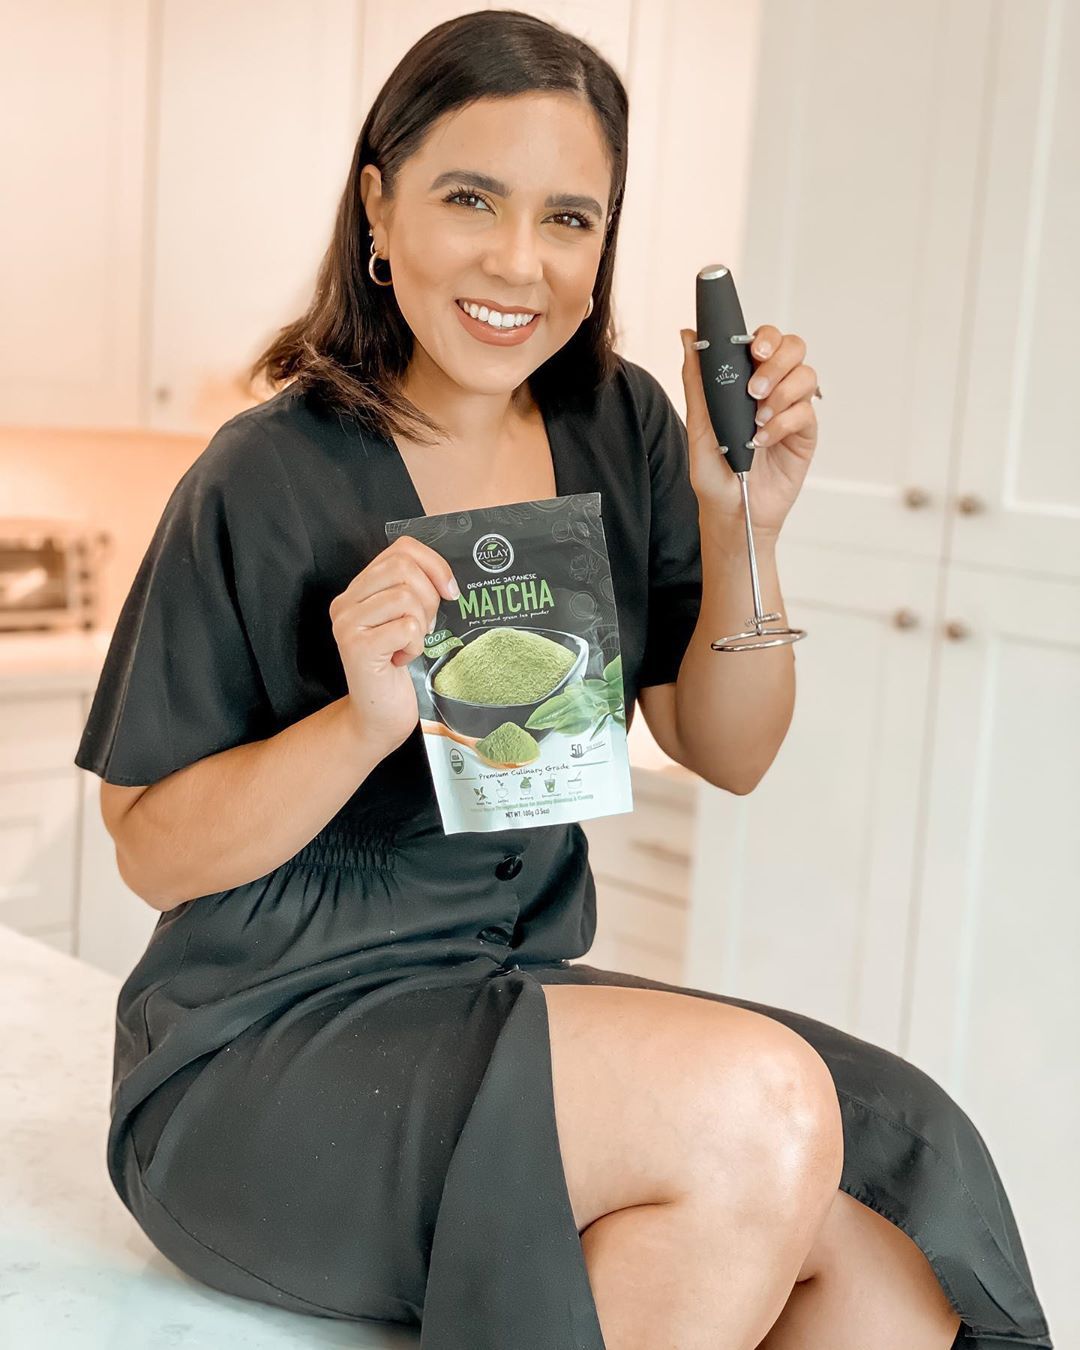 It's A Matcha Made From Heaven Says Priscilla! - Zulay Kitchen